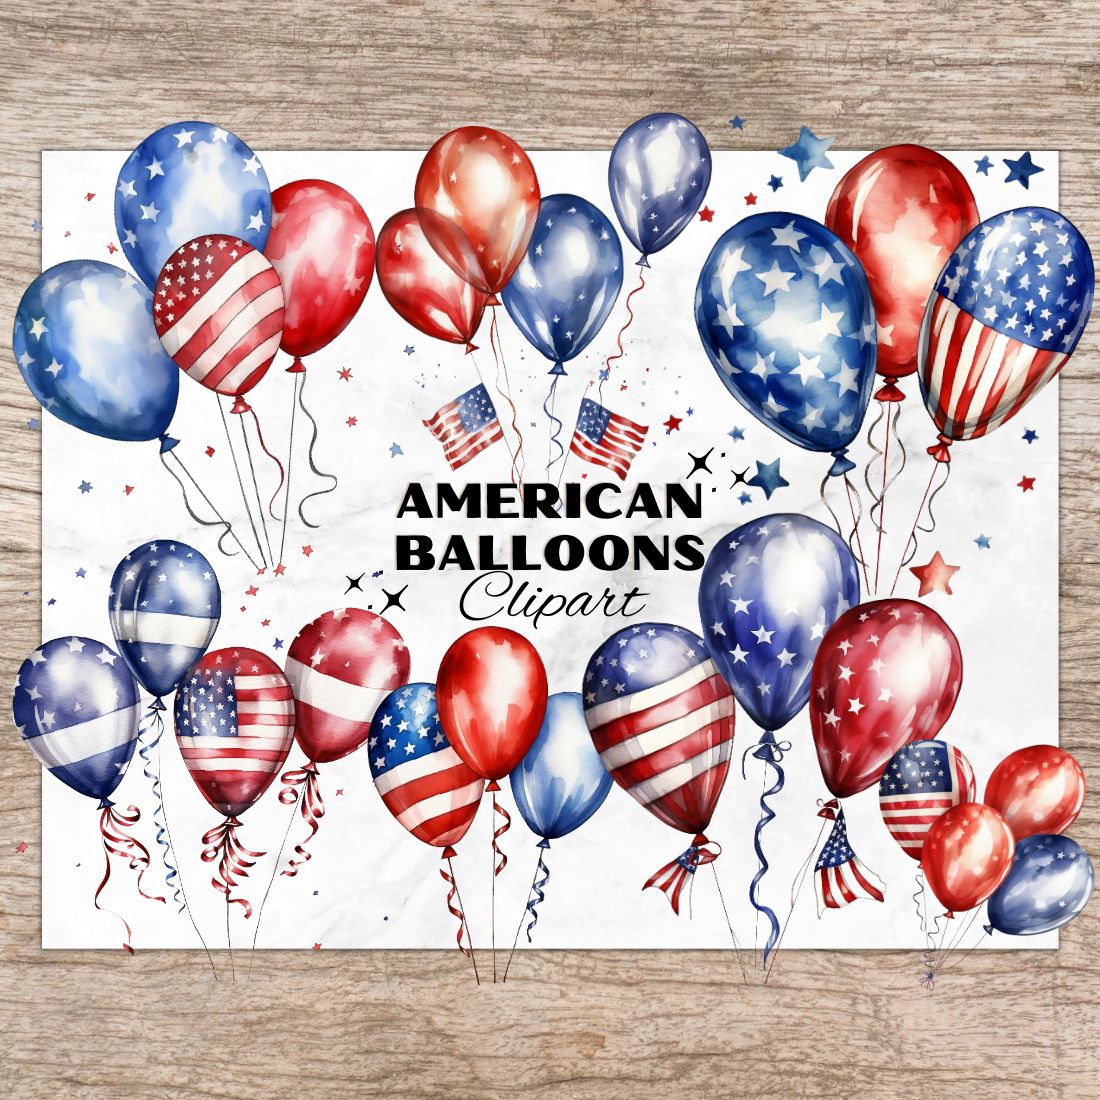 American 4th July Party Balloons cover image.